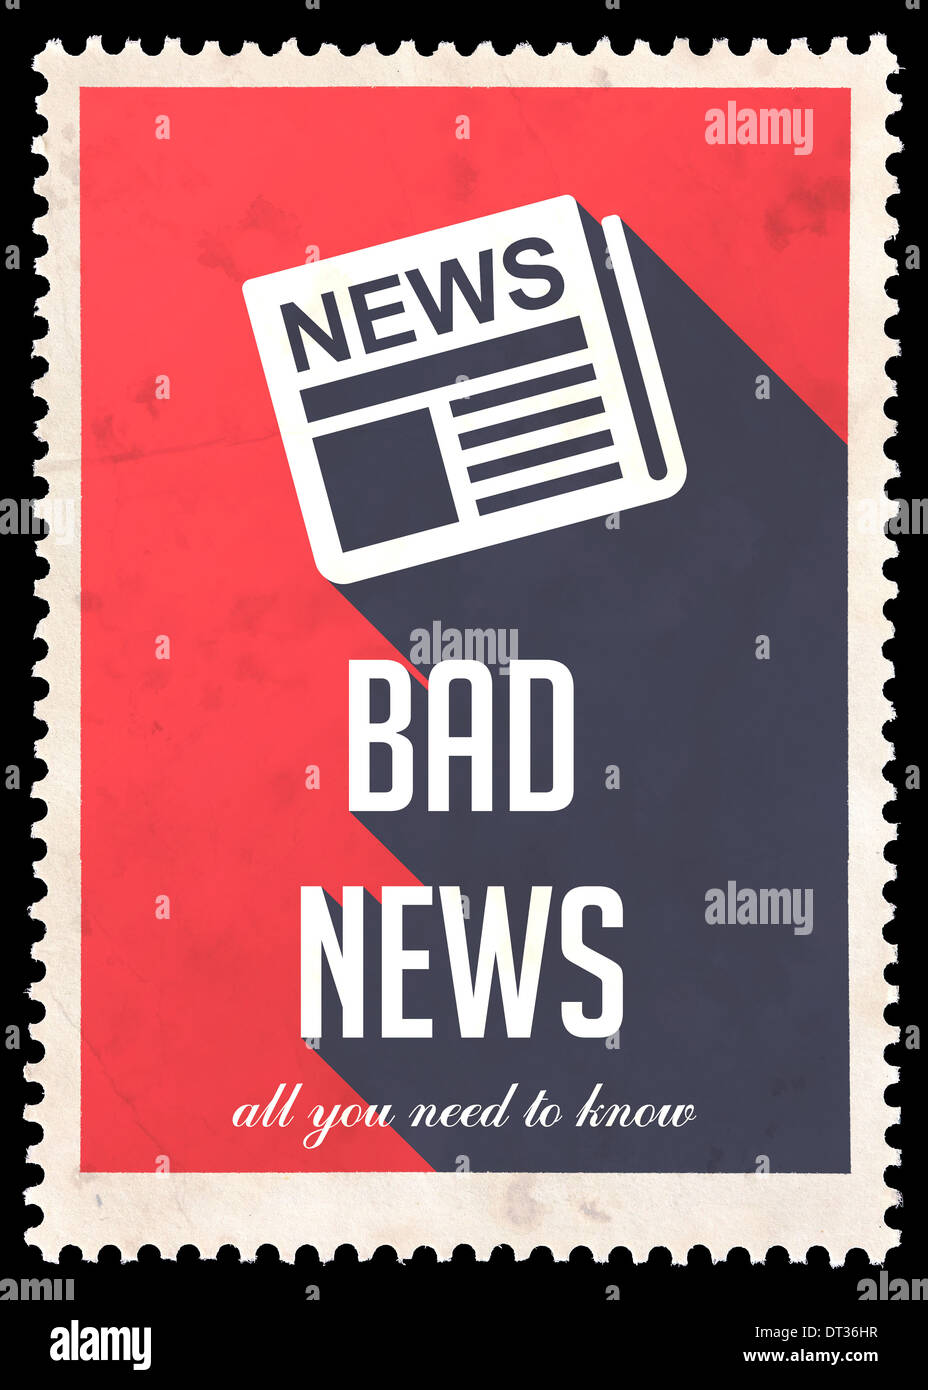 Bad News on Red in Flat Design. Stock Photo